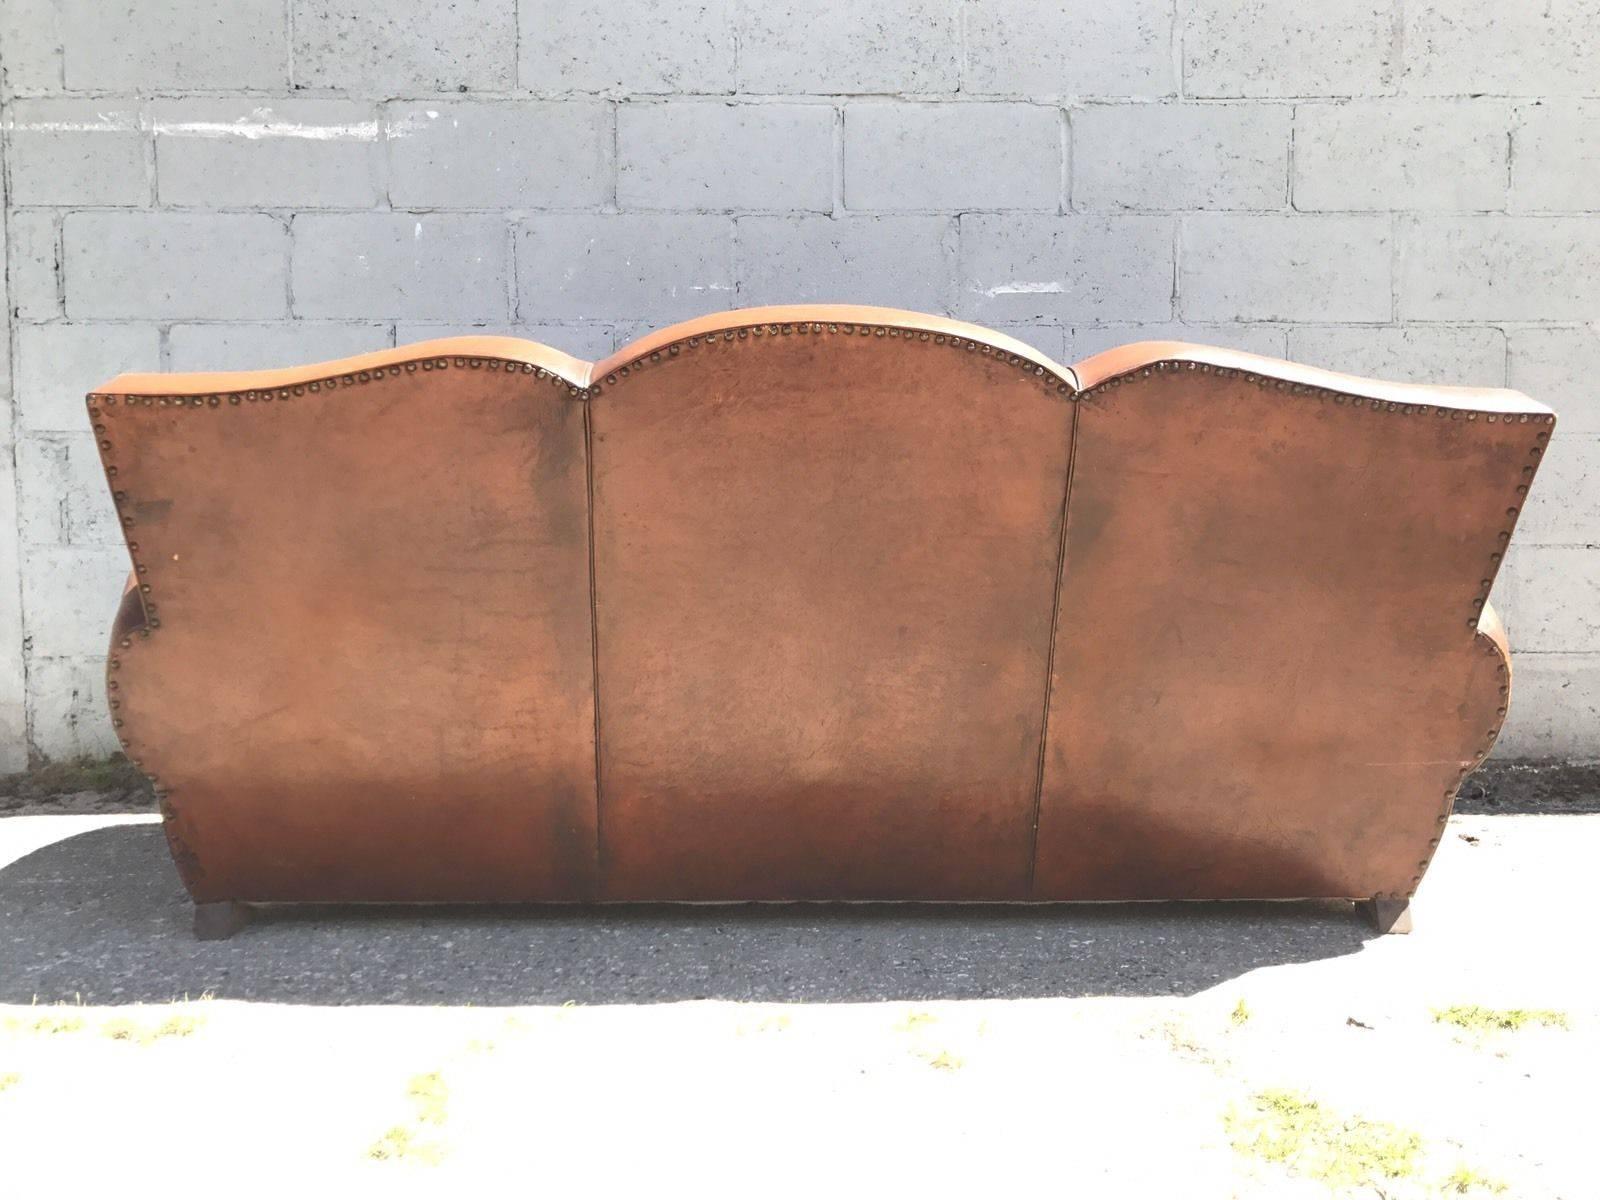 Here we have a beautiful French leather club sofa from the very early 1900s. Being a three-seat and not a sofa bed, this is a very rare find! In fantastic worn condition, but free of any holes or tares.

Becoming increasingly hard to find in